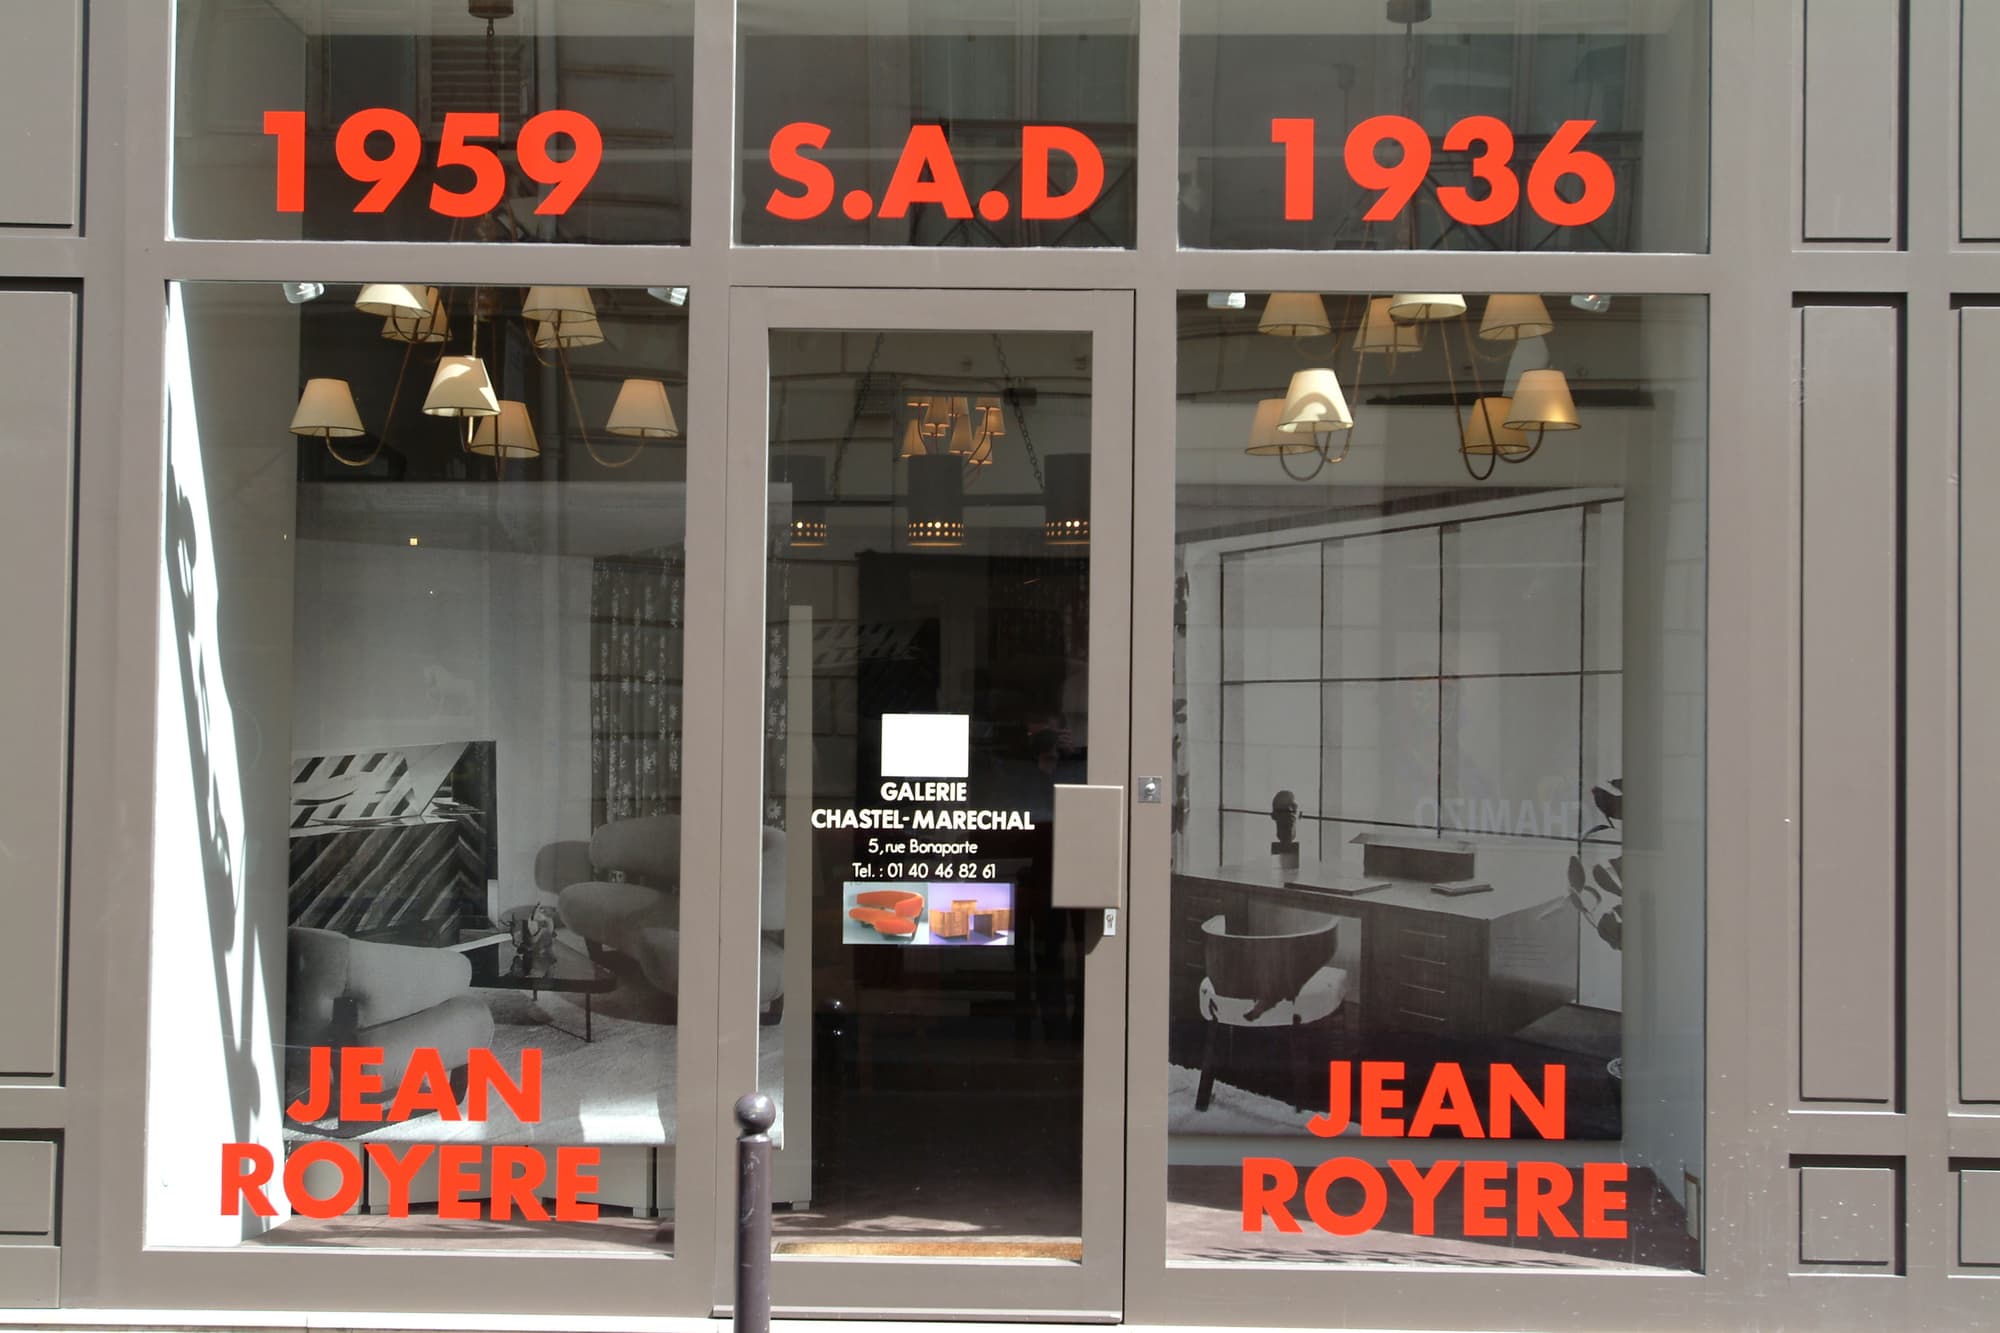 “Deux ensembles exceptionnels”, JEAN ROYERE, Galerie Chastel-Maréchal, from June 3rd to July 3rd, 2005